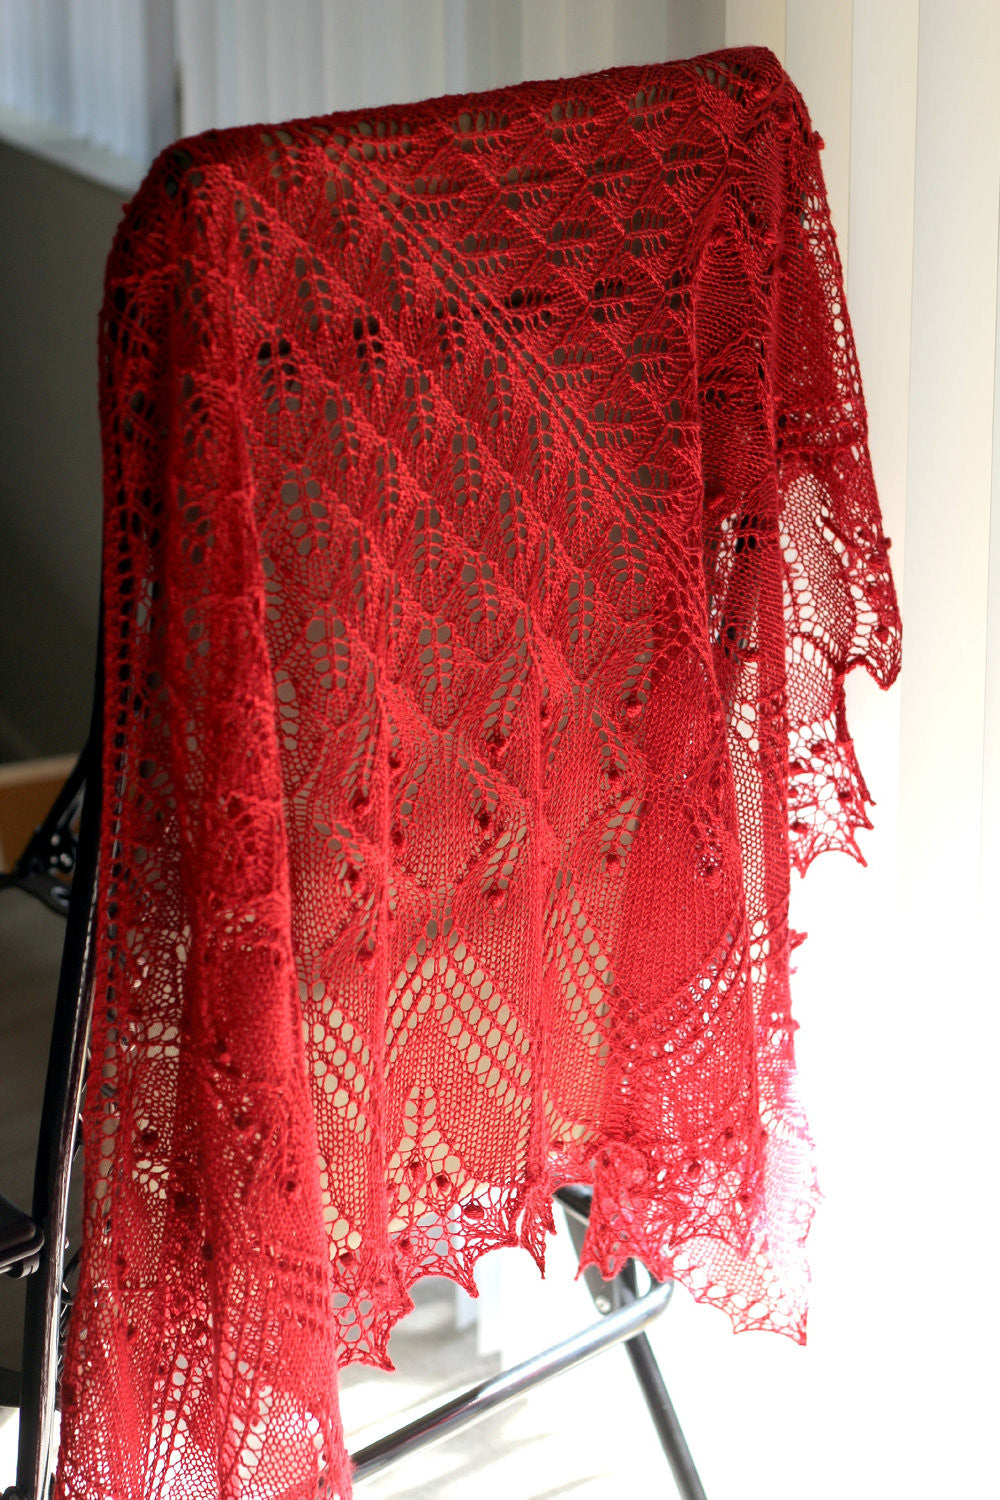 Red knitted lace shawl